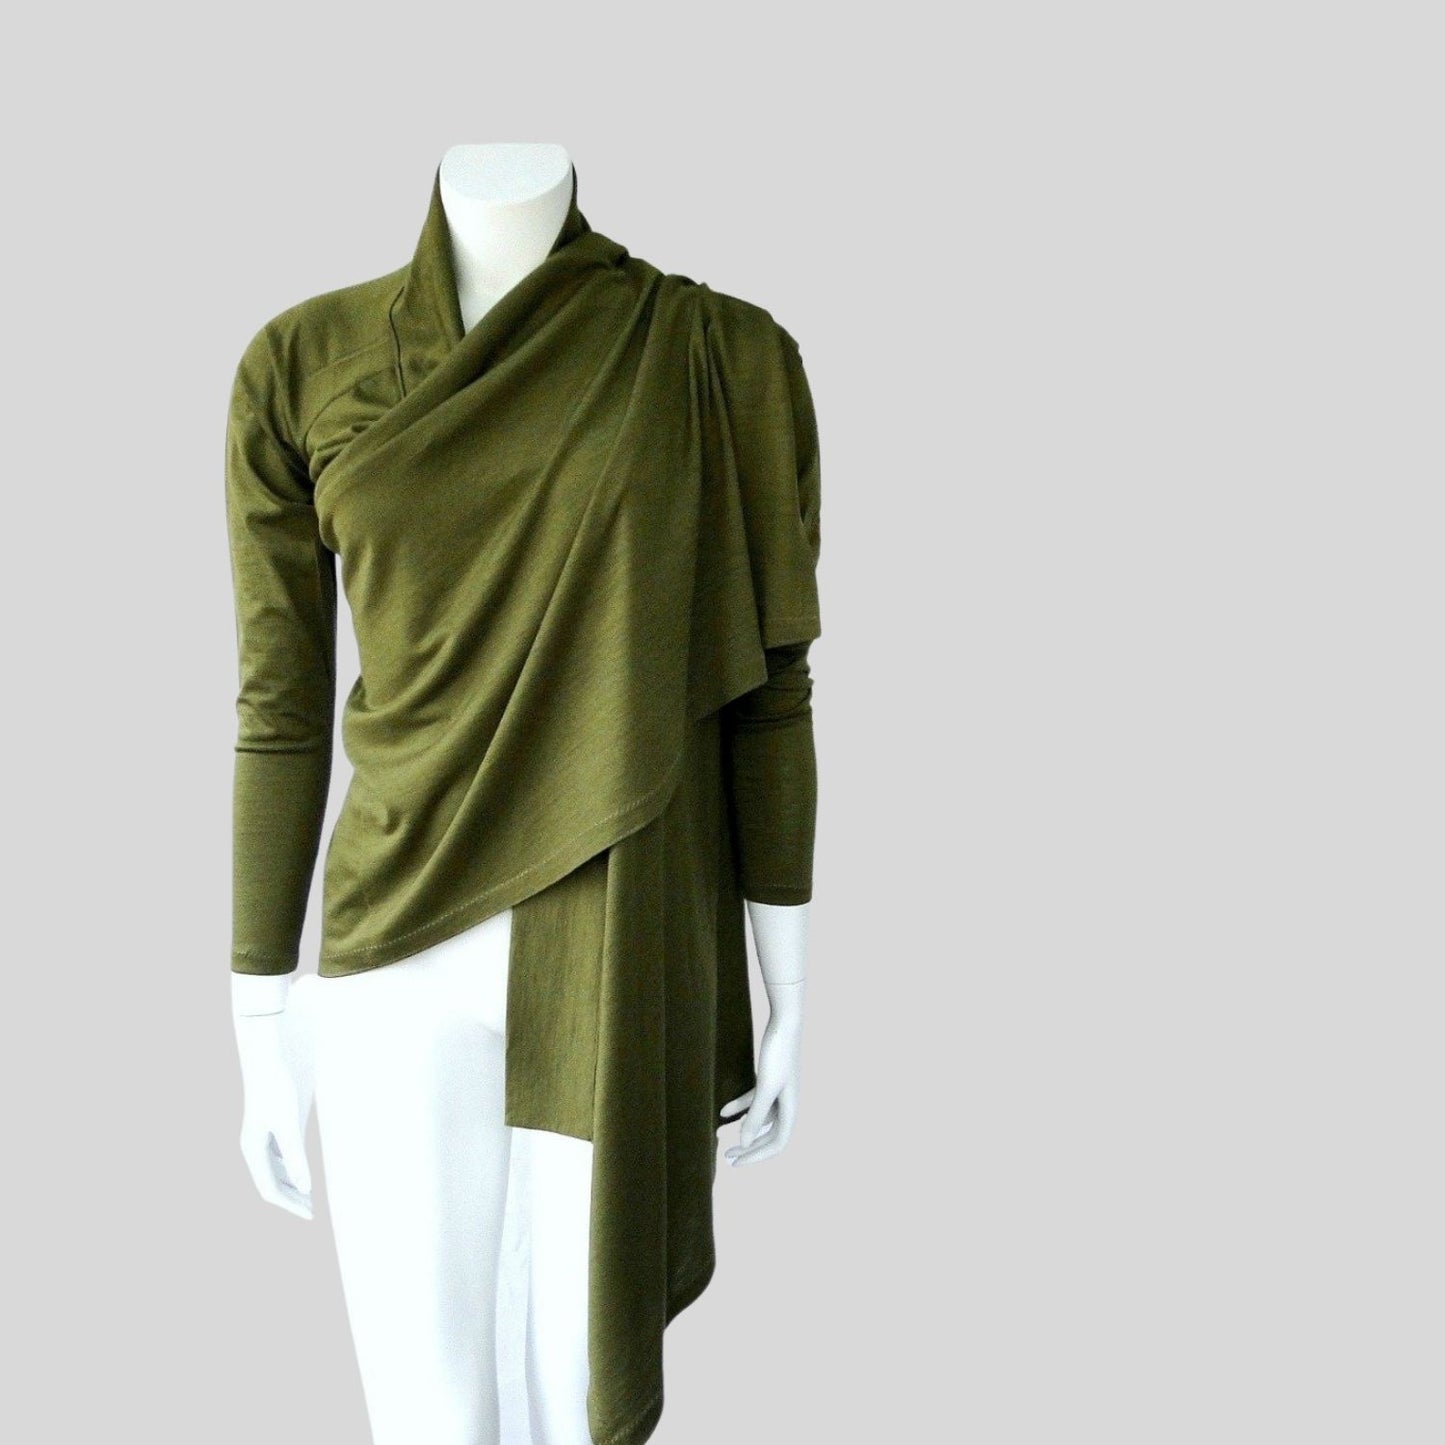 Olive green wool cardigan | 100% merino wool jersey top | Shop merino wool clothing made in Canada | Women's organic clothes store | Econica